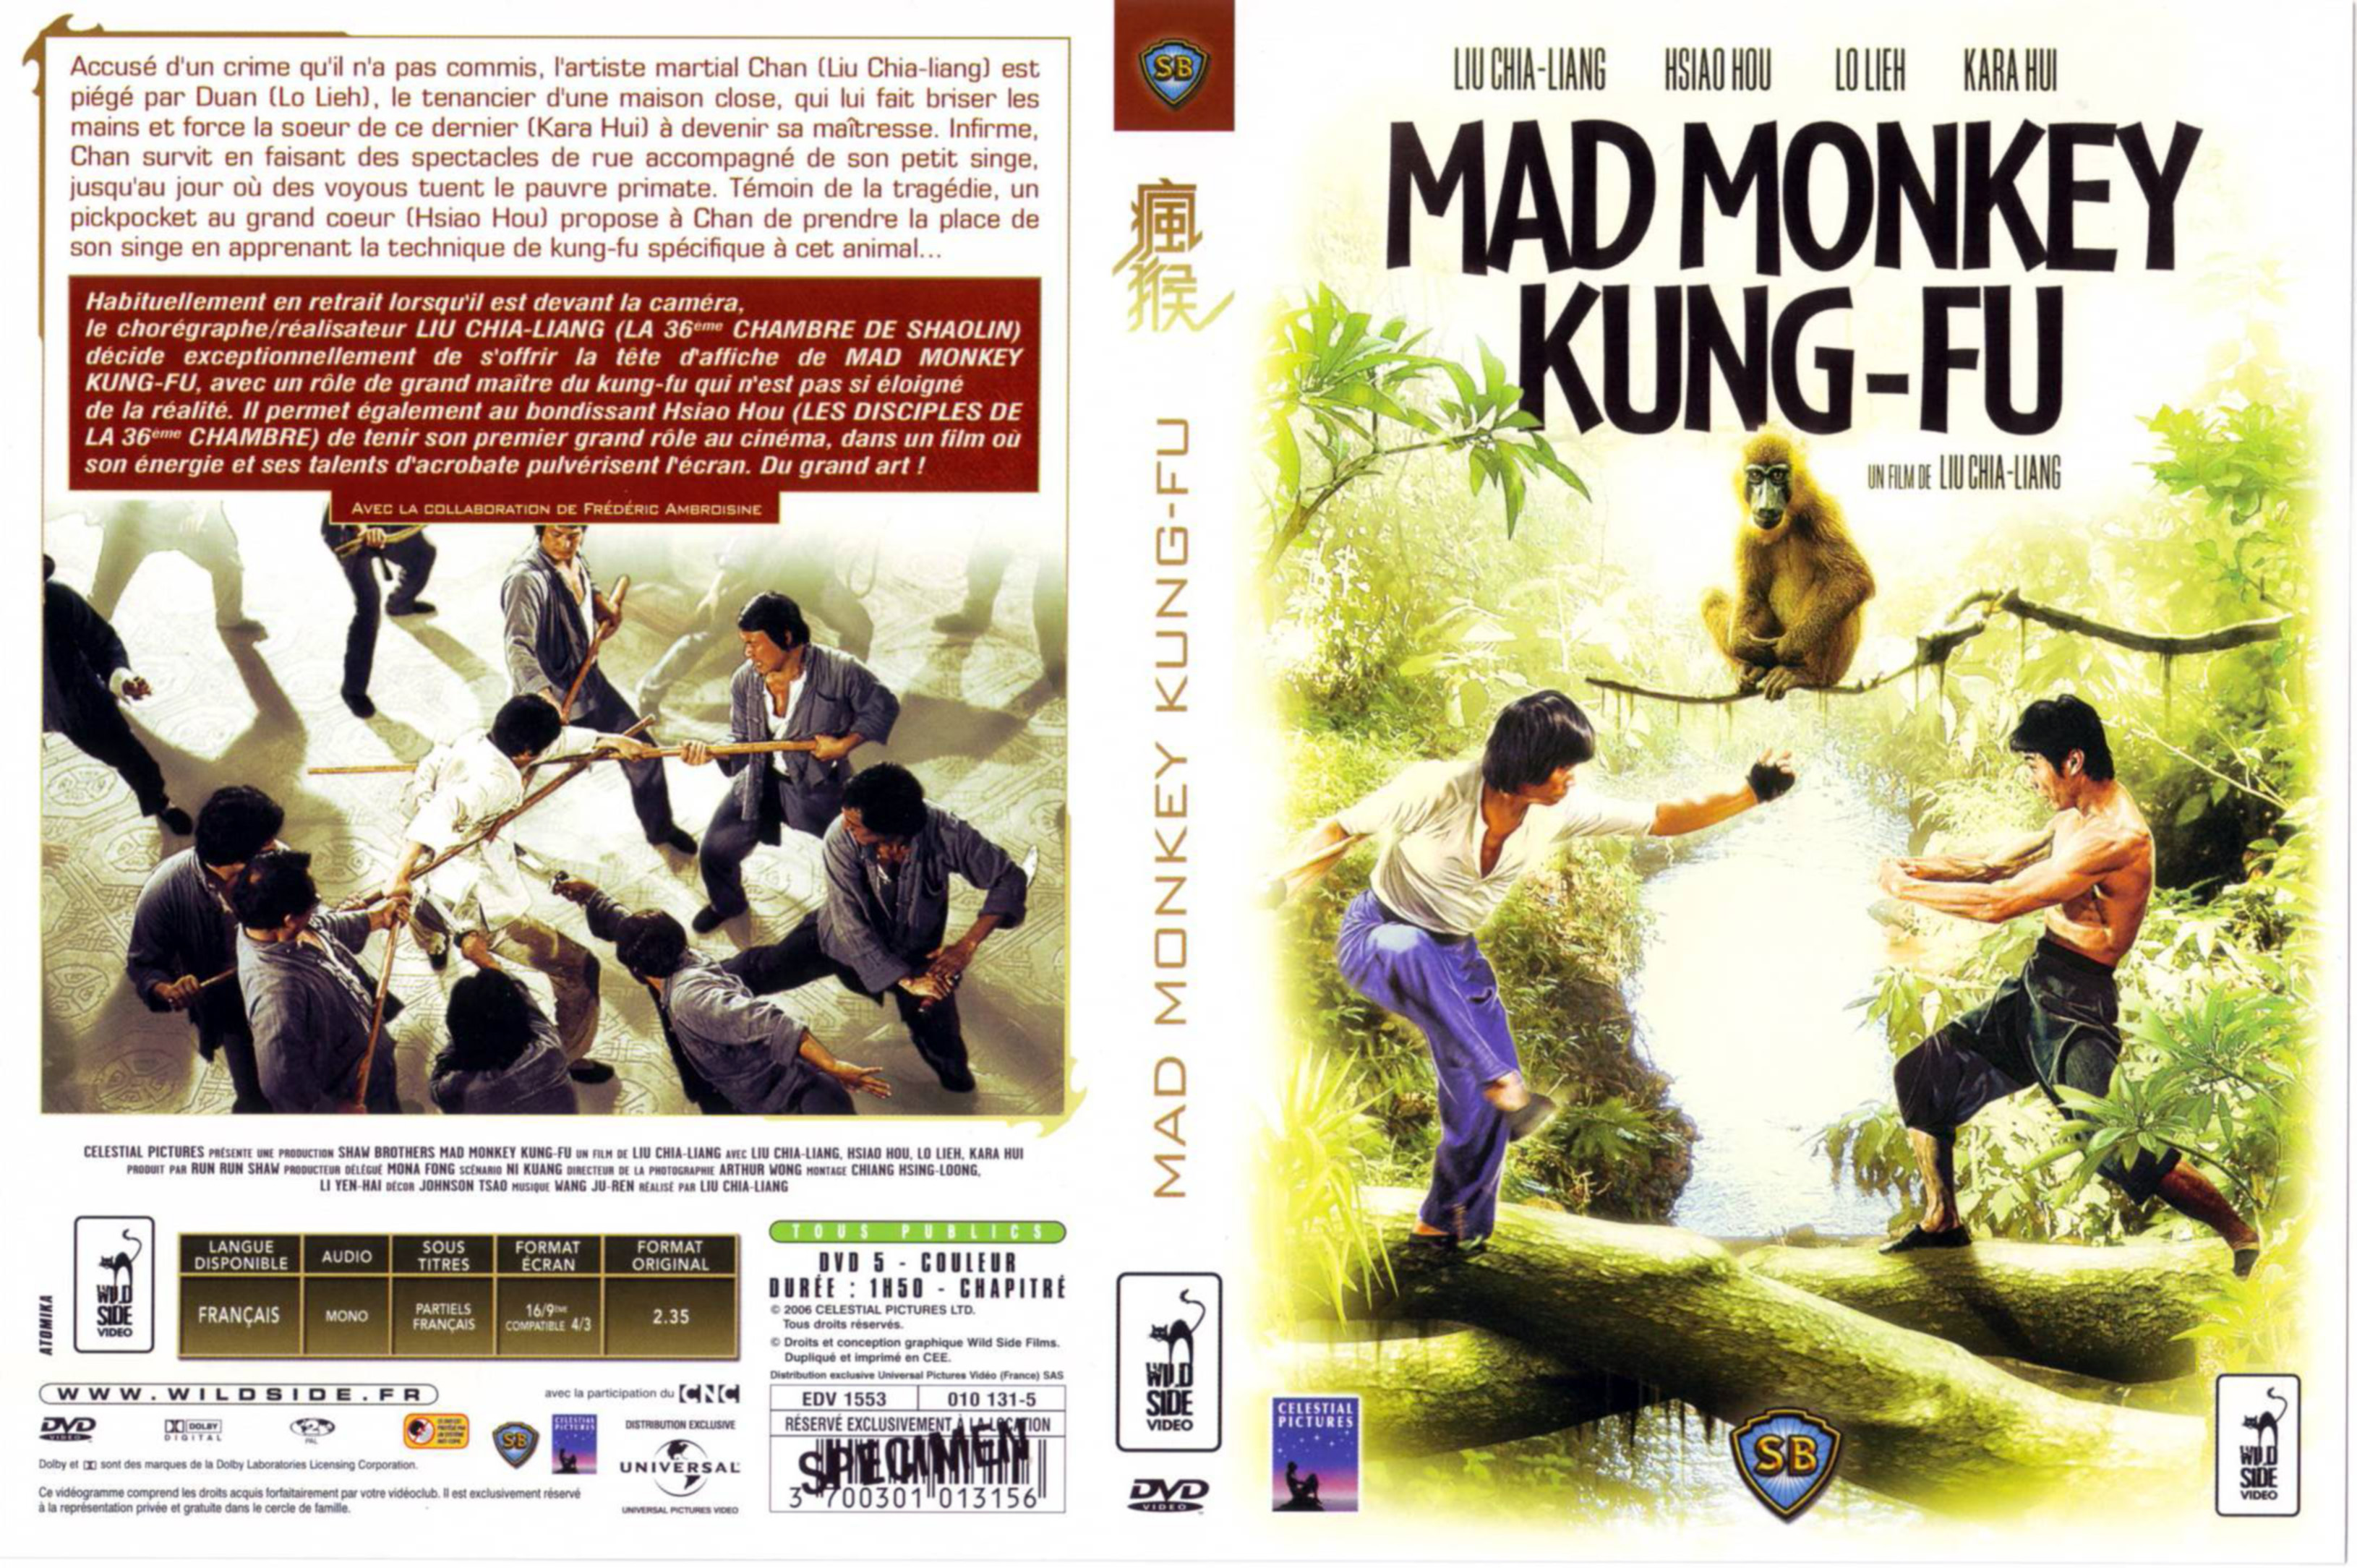 Jaquette DVD Mad monkey kung-fu